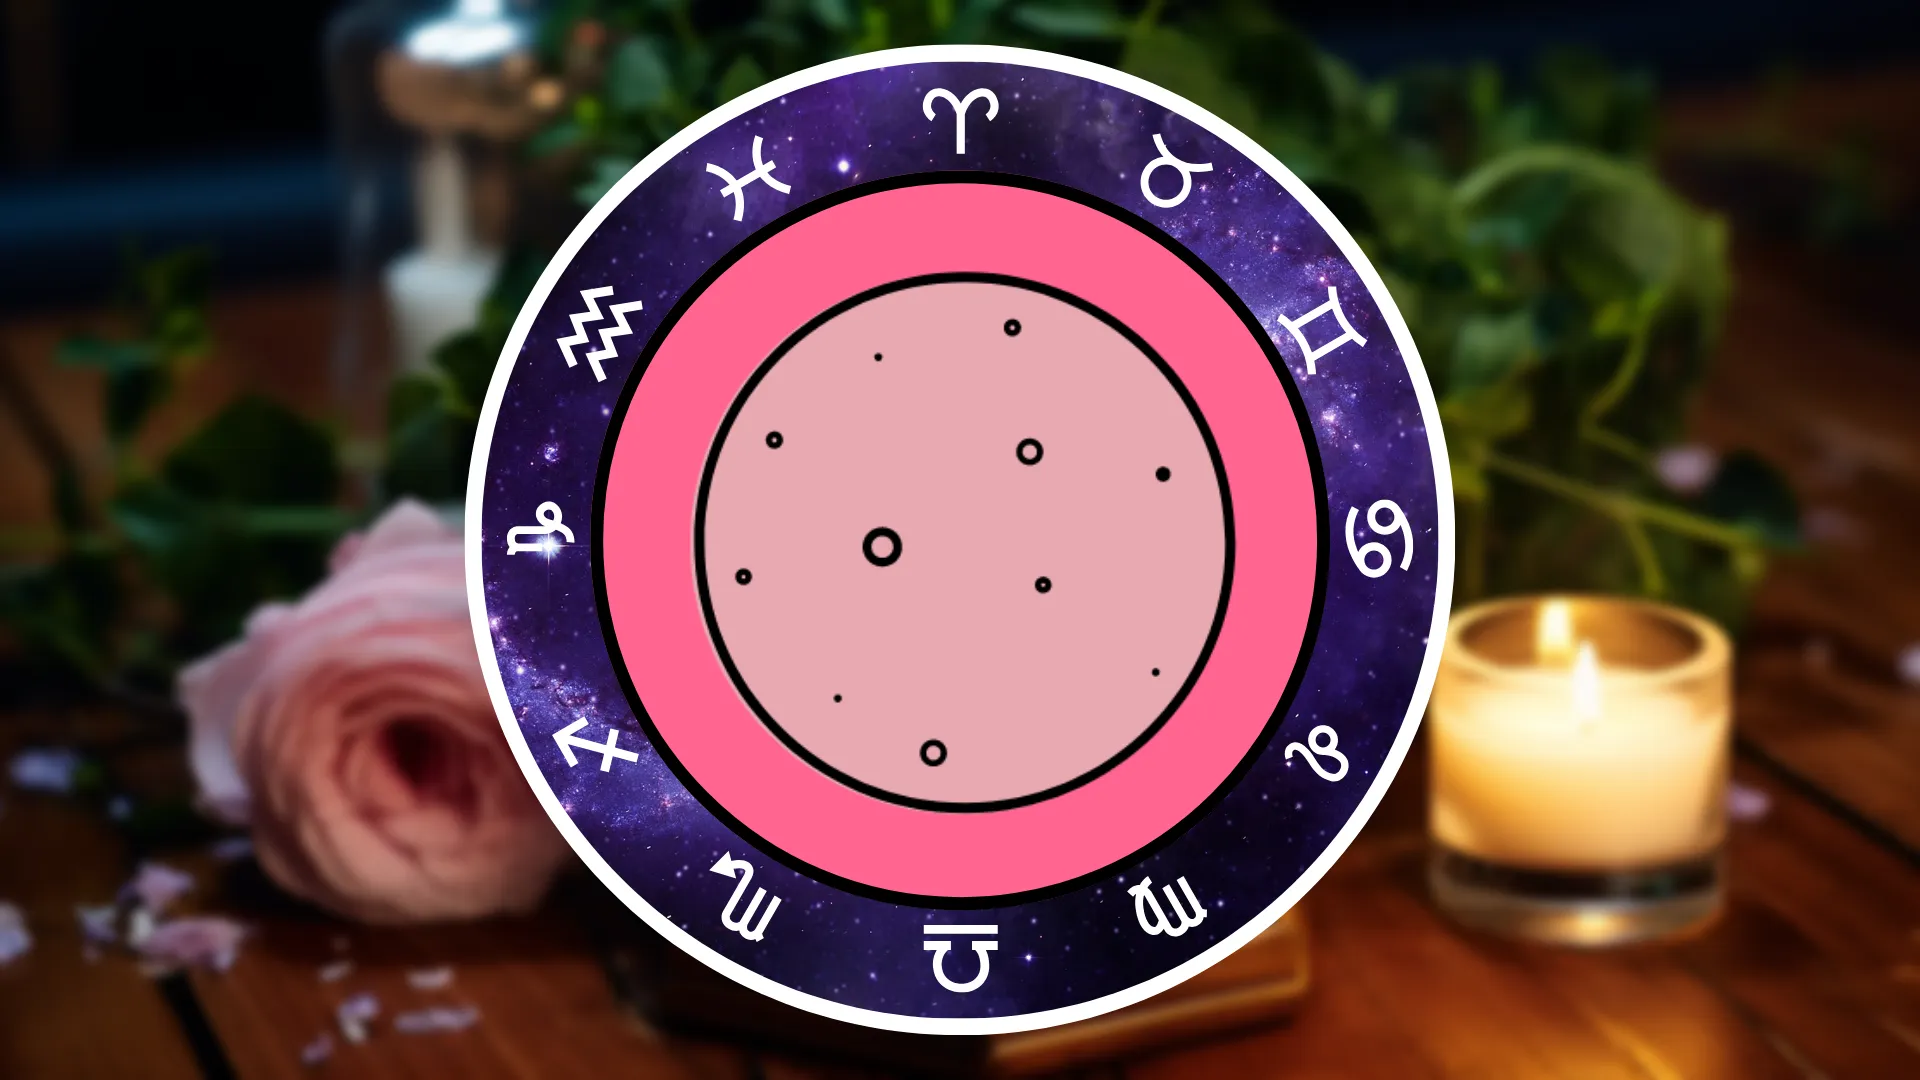 A symbol of a Full Moon is surrounded by the Zodiac signs on a table with flowers and candles